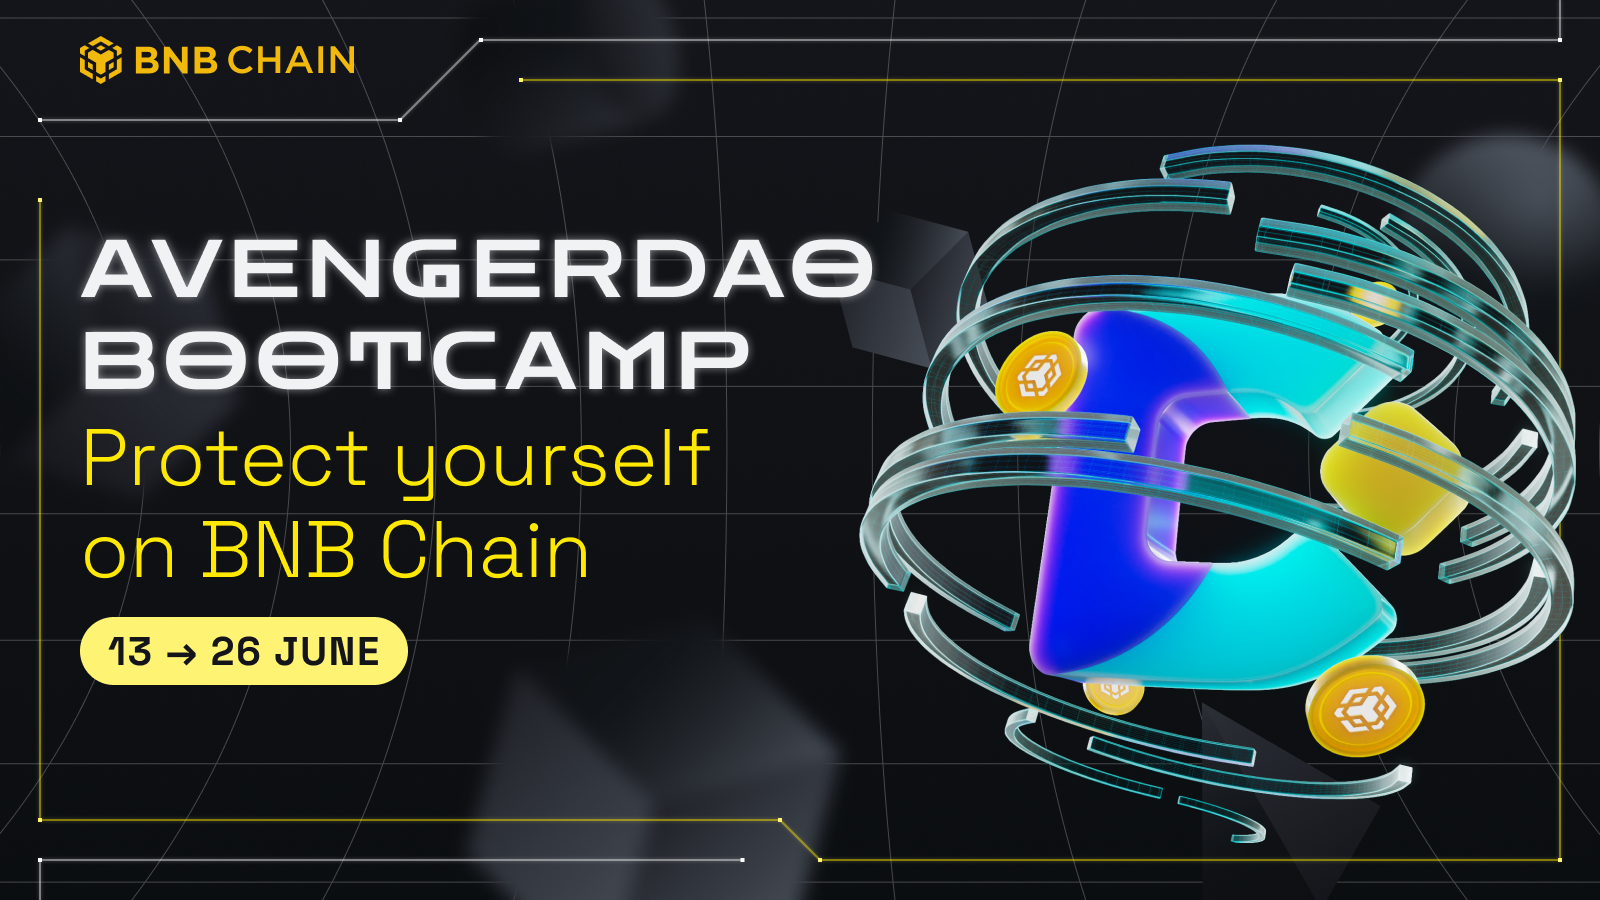 Join AvengerDAO Bootcamp and Share $10K USDT in Prizes